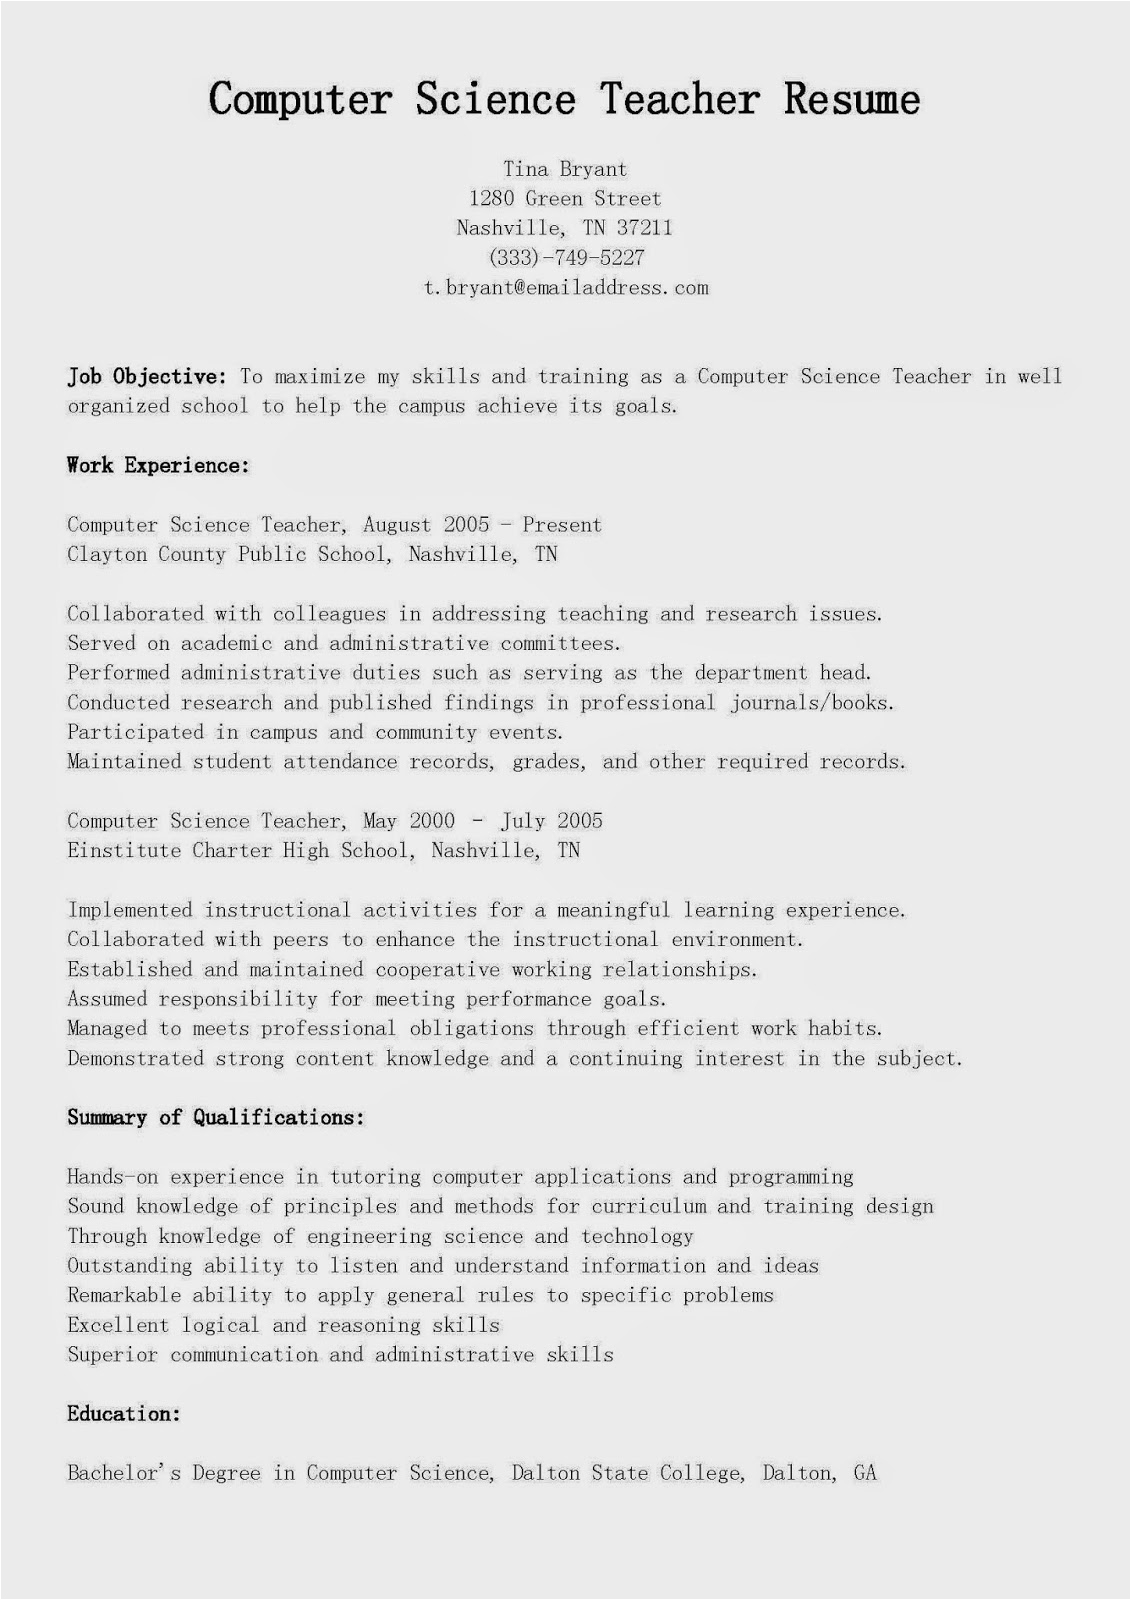 Sample Resume for Lecturer In Computer Science Resume Samples Puter Science Teacher Resume Sample